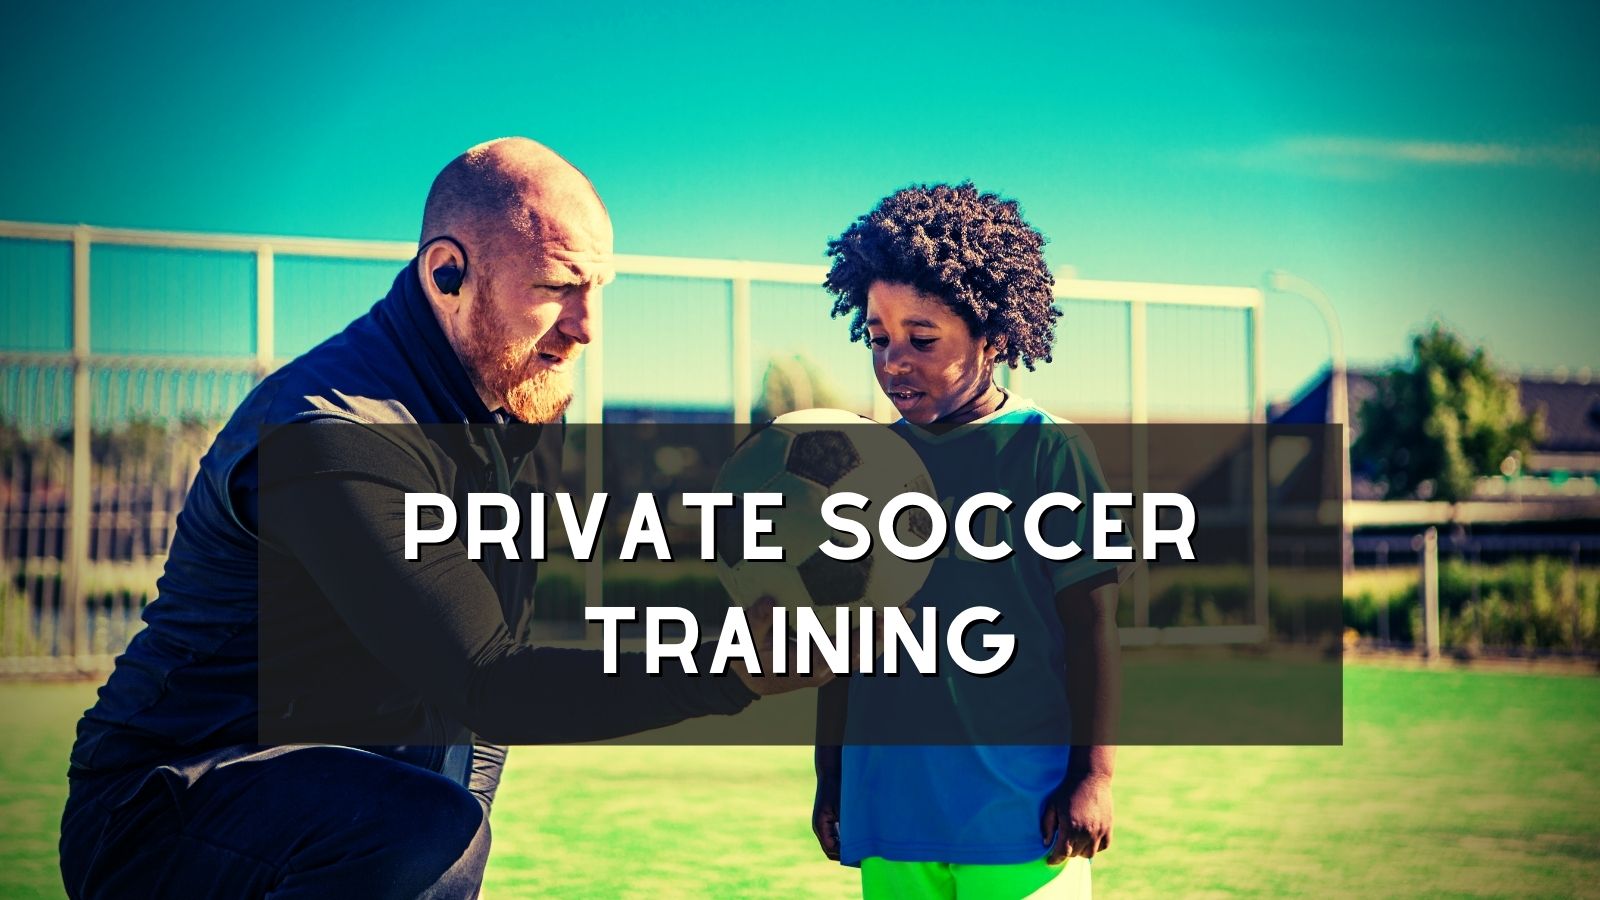 How Much Does Private Soccer Training Cost?